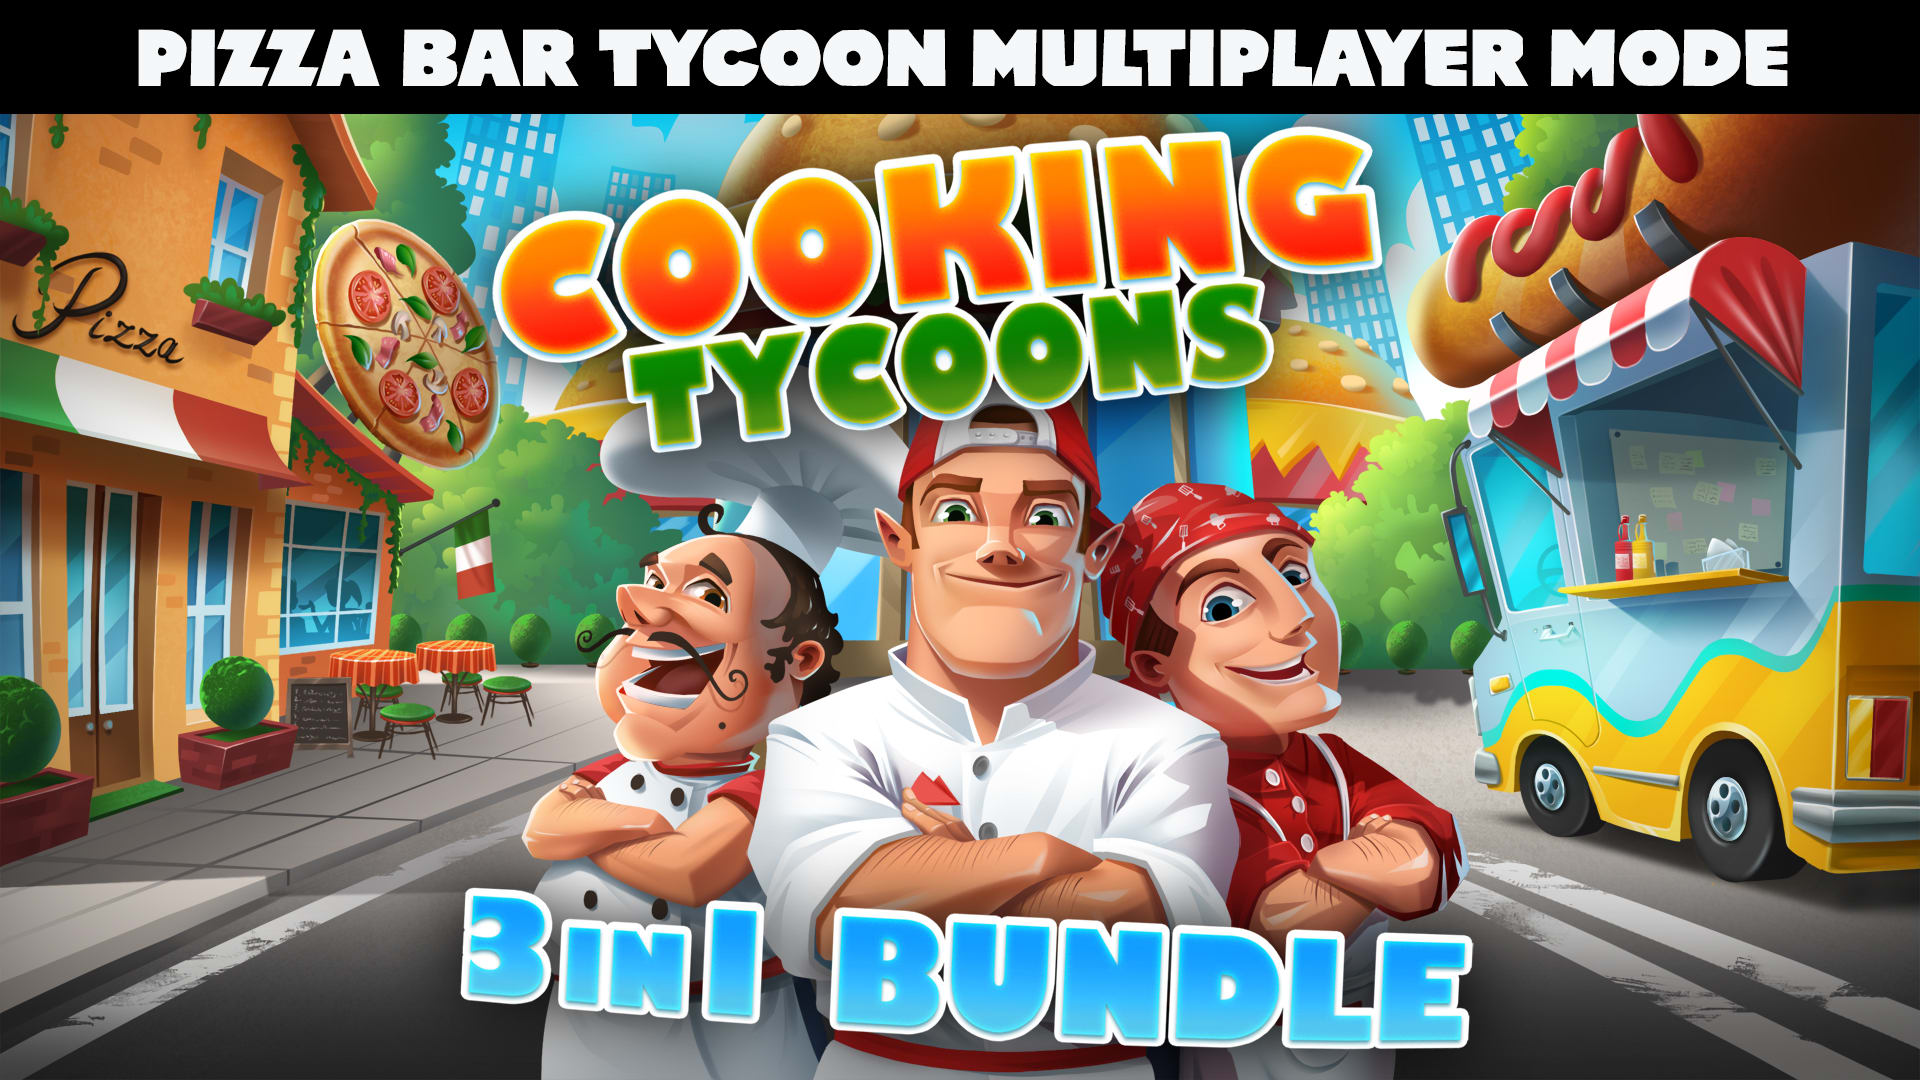 Cooking Tycoons: 3 in 1 Bundle - Pizza Bar Tycoon Multiplayer Mode 1